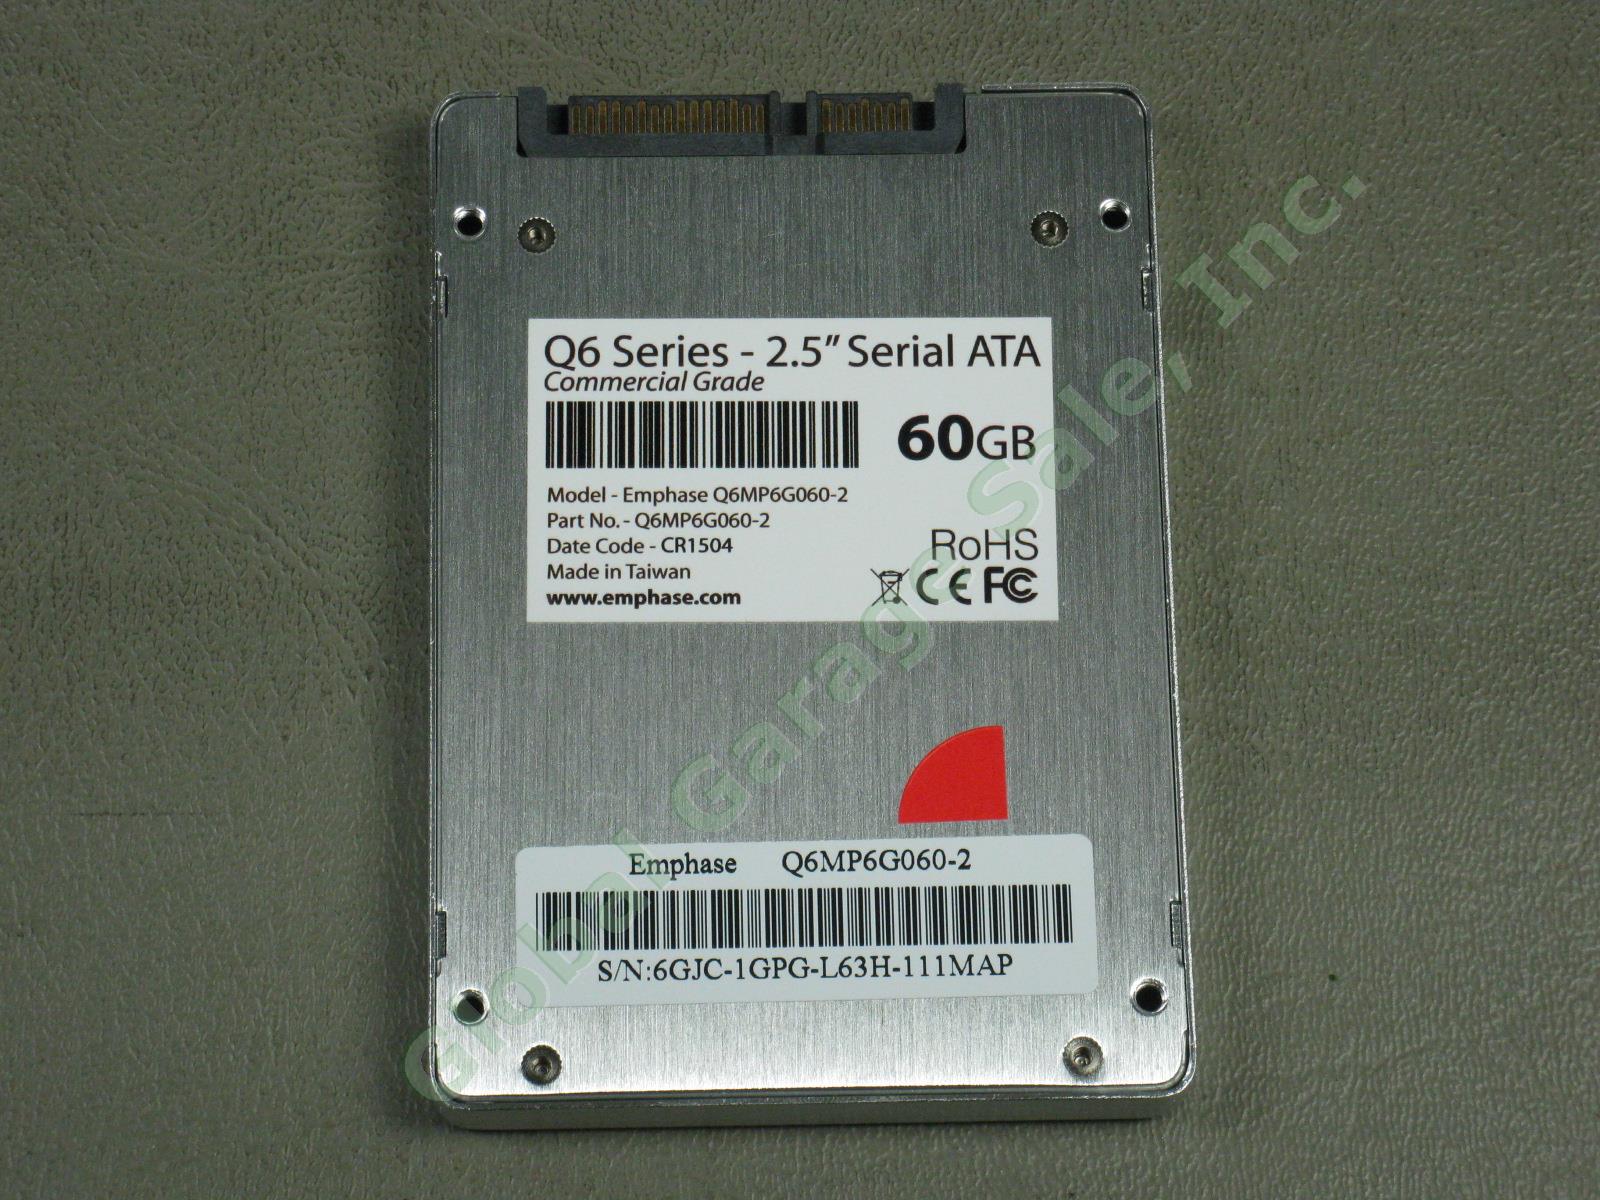 10 Emphase Q6 60GB SSD SATA3 Industrial 2.5 MLC NAND Flash Solid State Drive Lot 3